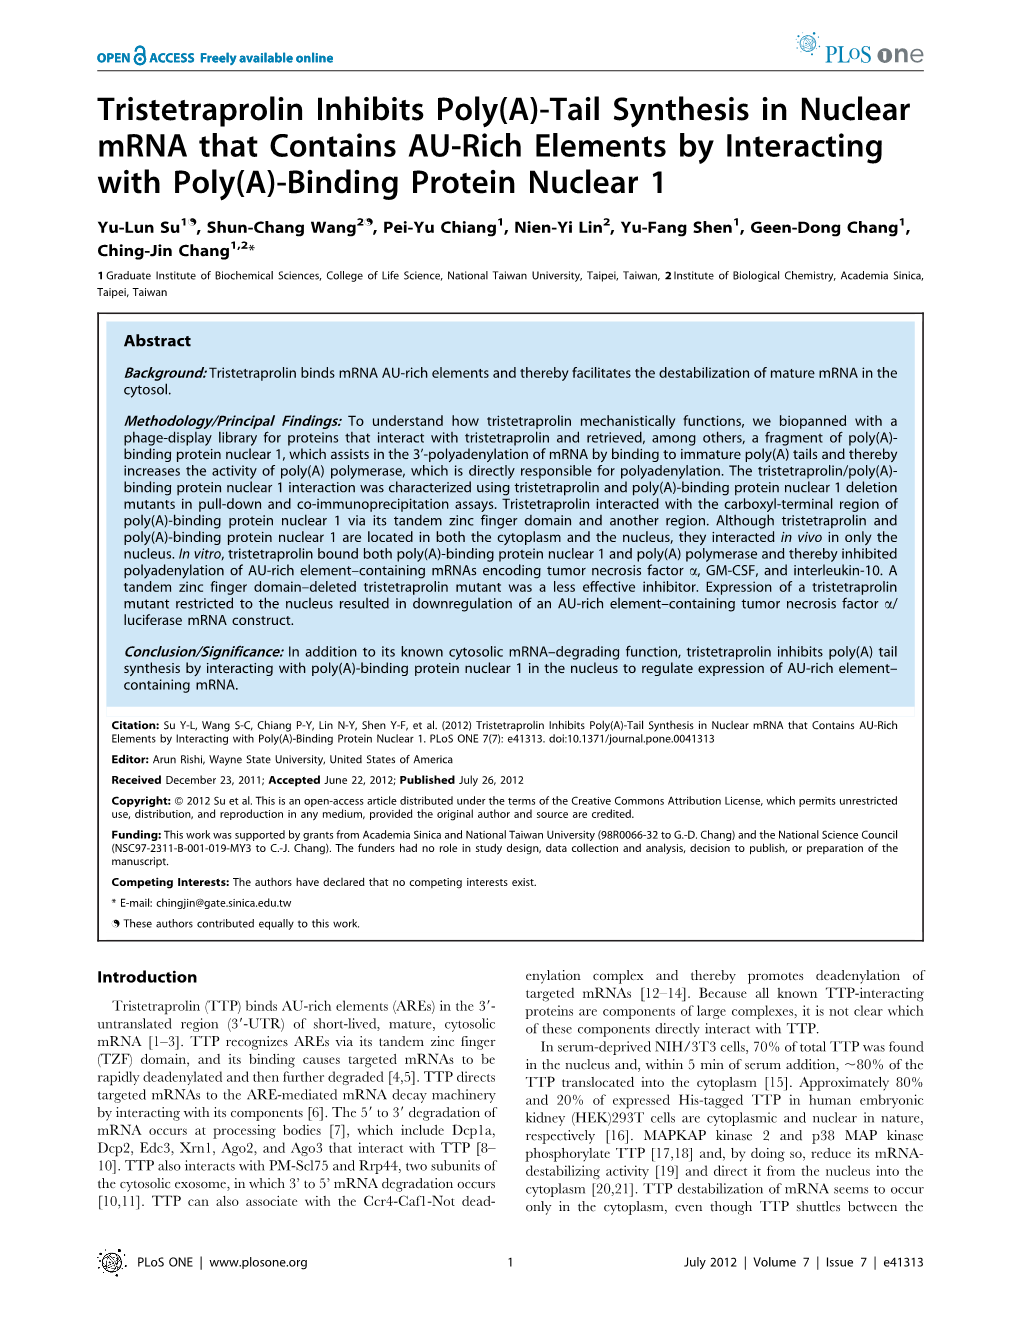 Tail Synthesis in Nuclear Mrna That Contains AU-Rich Elements by Interacting with Poly(A)-Binding Protein Nuclear 1